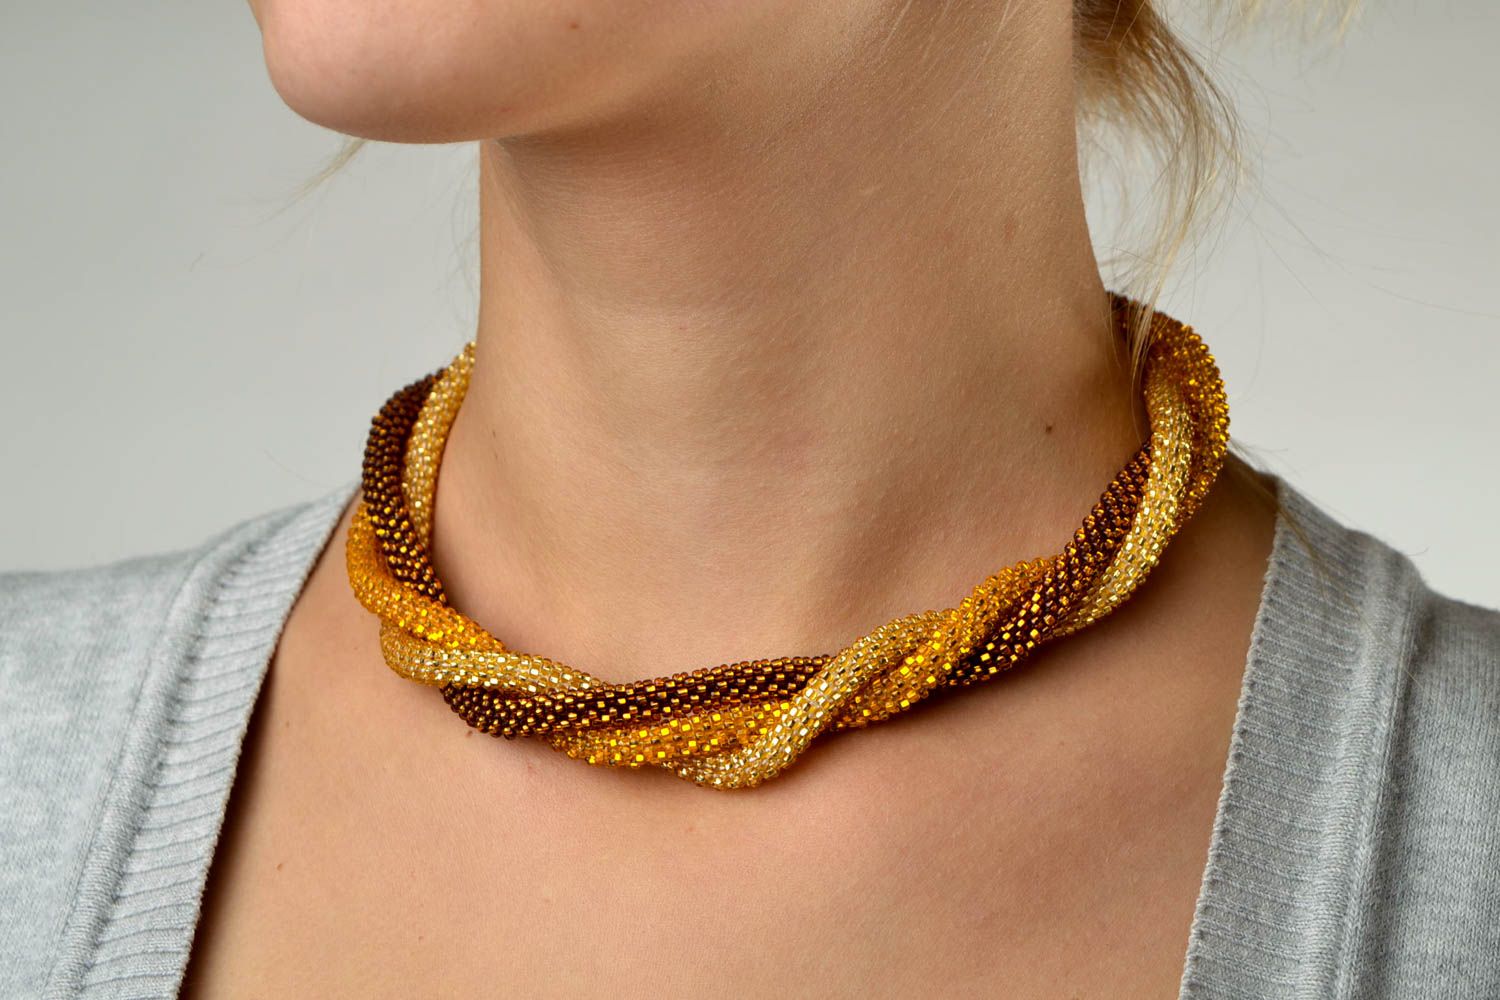 Handmade beaded cord necklace unusual unique jewelry stylish necklace photo 1